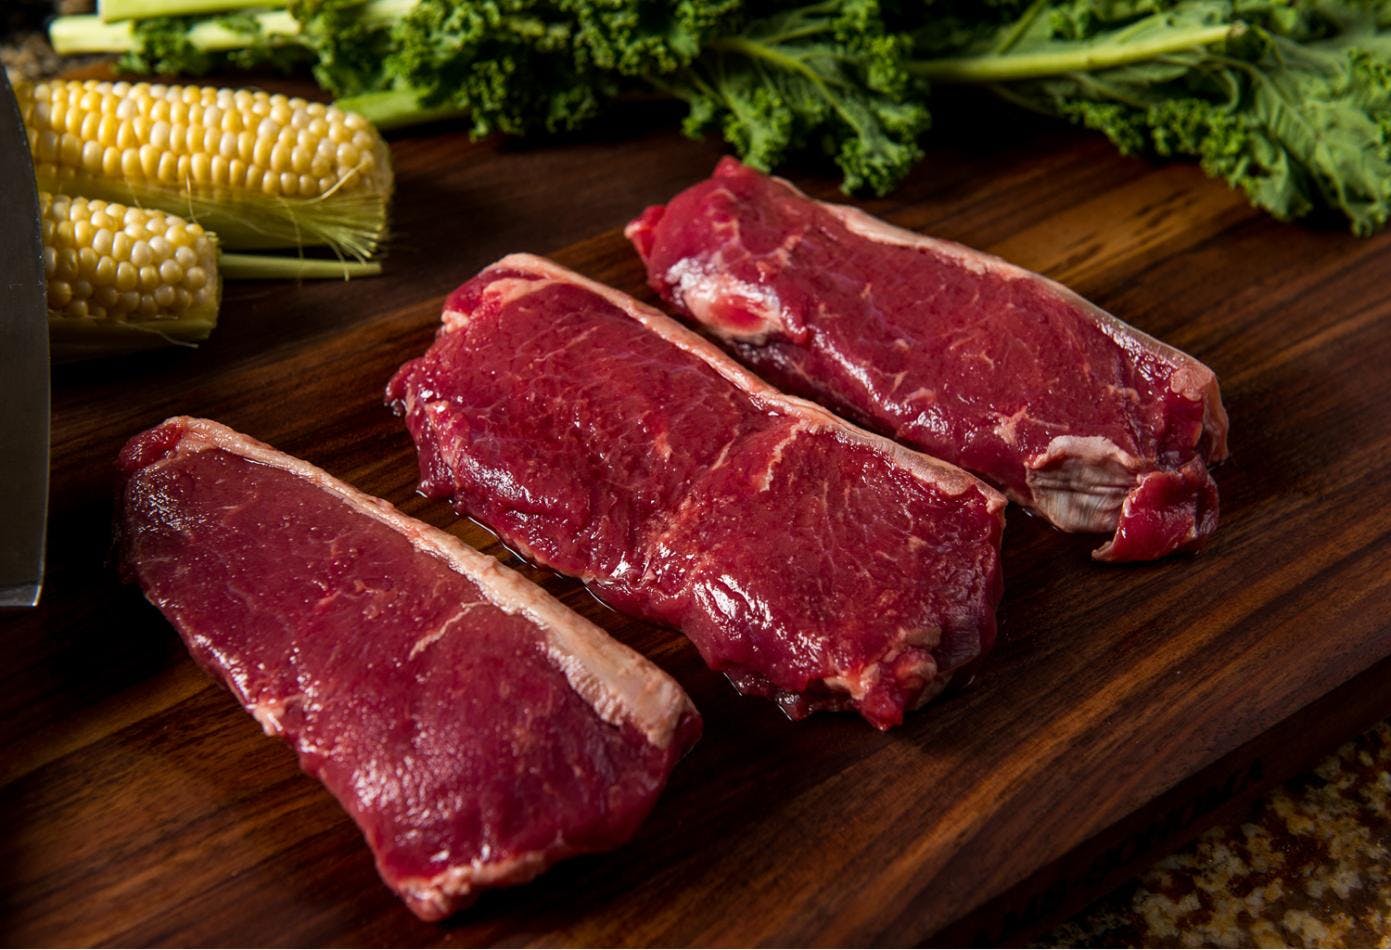 Grass-Fed vs. Grain-Fed Beef: What's the Healthy Choice?